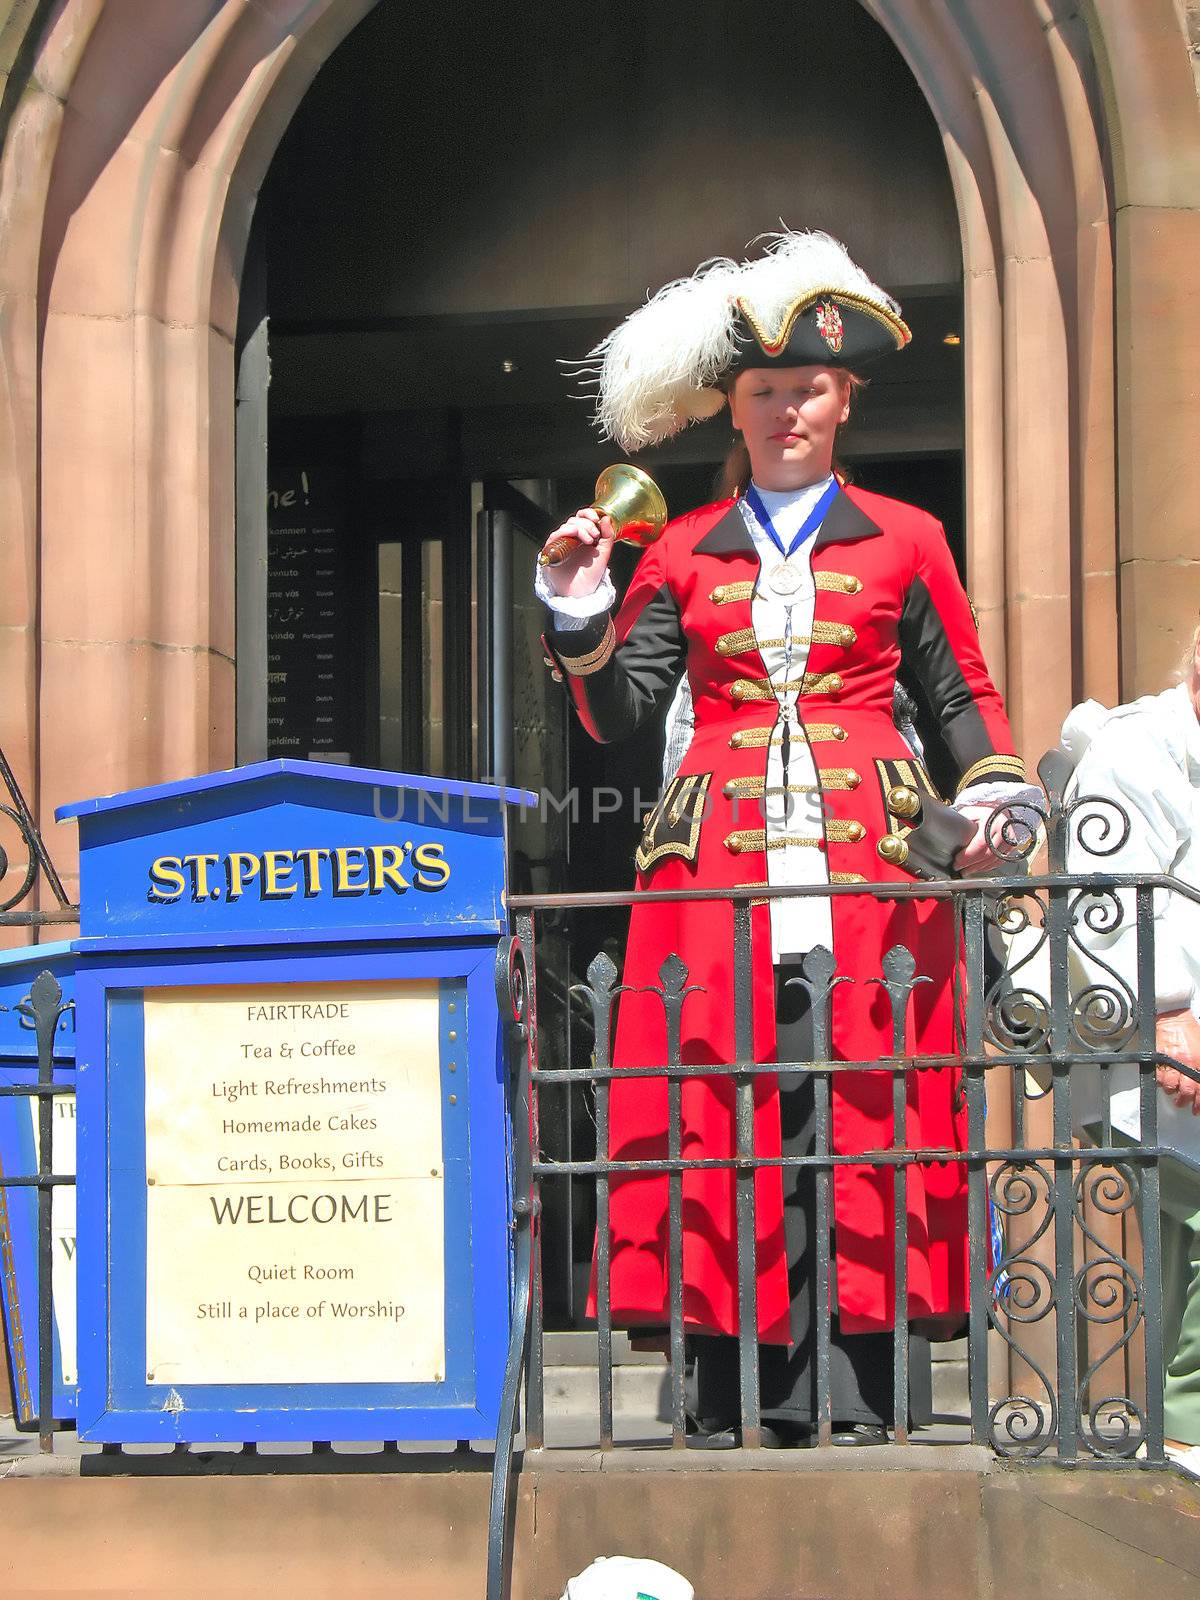 Town Crier Ringing Bell in Chester England UK